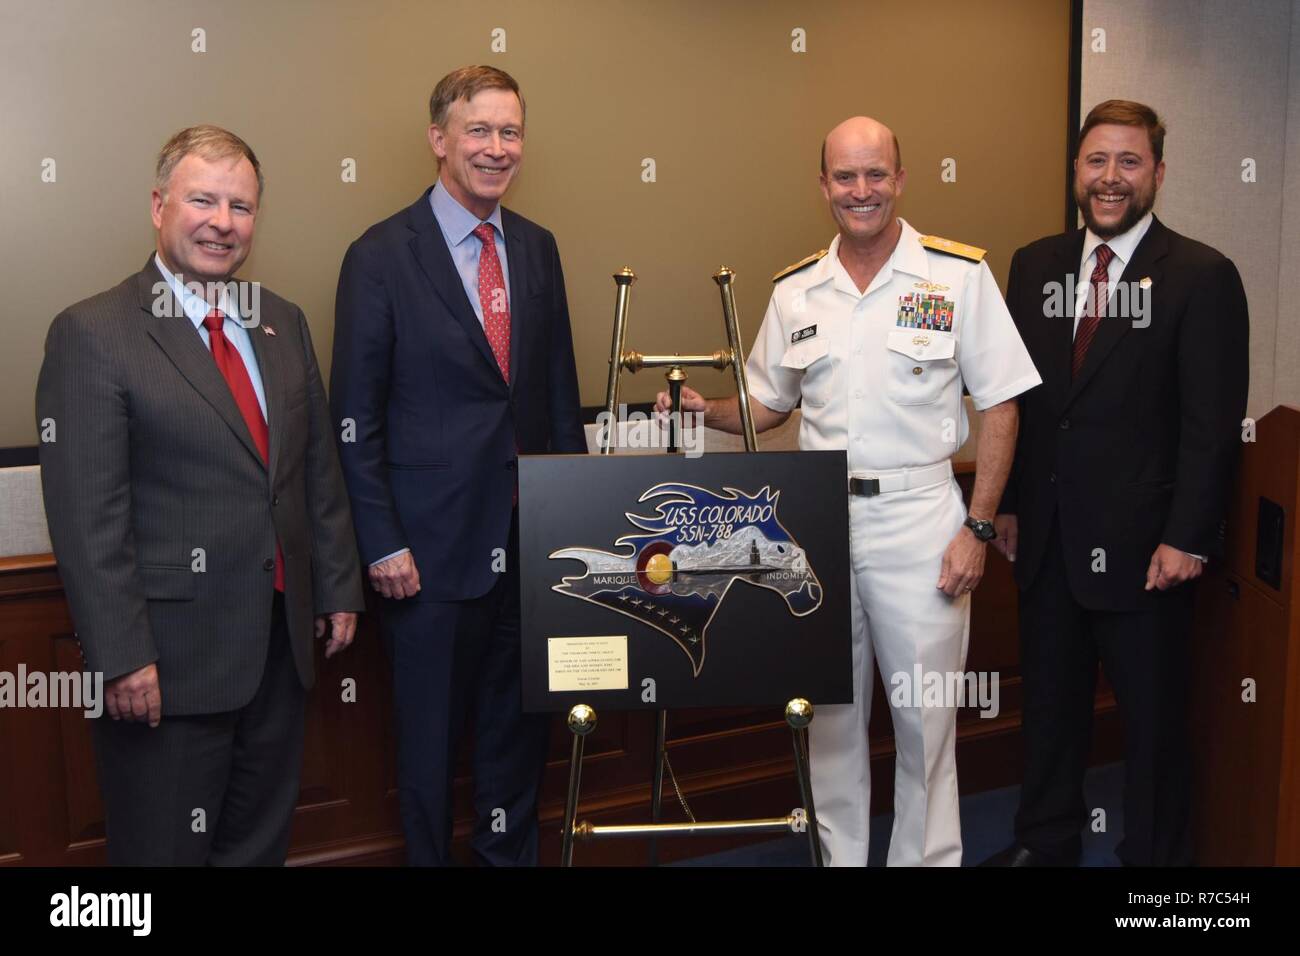 WASHINGTON (May 16, 2017) U.S. Rep. Doug Lamborn, left, from Colorado's 5th Congressional District,  Colorado Gov. John Hickenlooper and Christian Anschutz, right, managing director of Western Development Group, present a plaque with the crest of USS Colorado (SSN 788) to Rear Adm. William R. Merz, director of Undersea Warfare Division, at the Pentagon. Colorado was christened in December 2016 and is scheduled to be commissioned in December 2017. Stock Photo